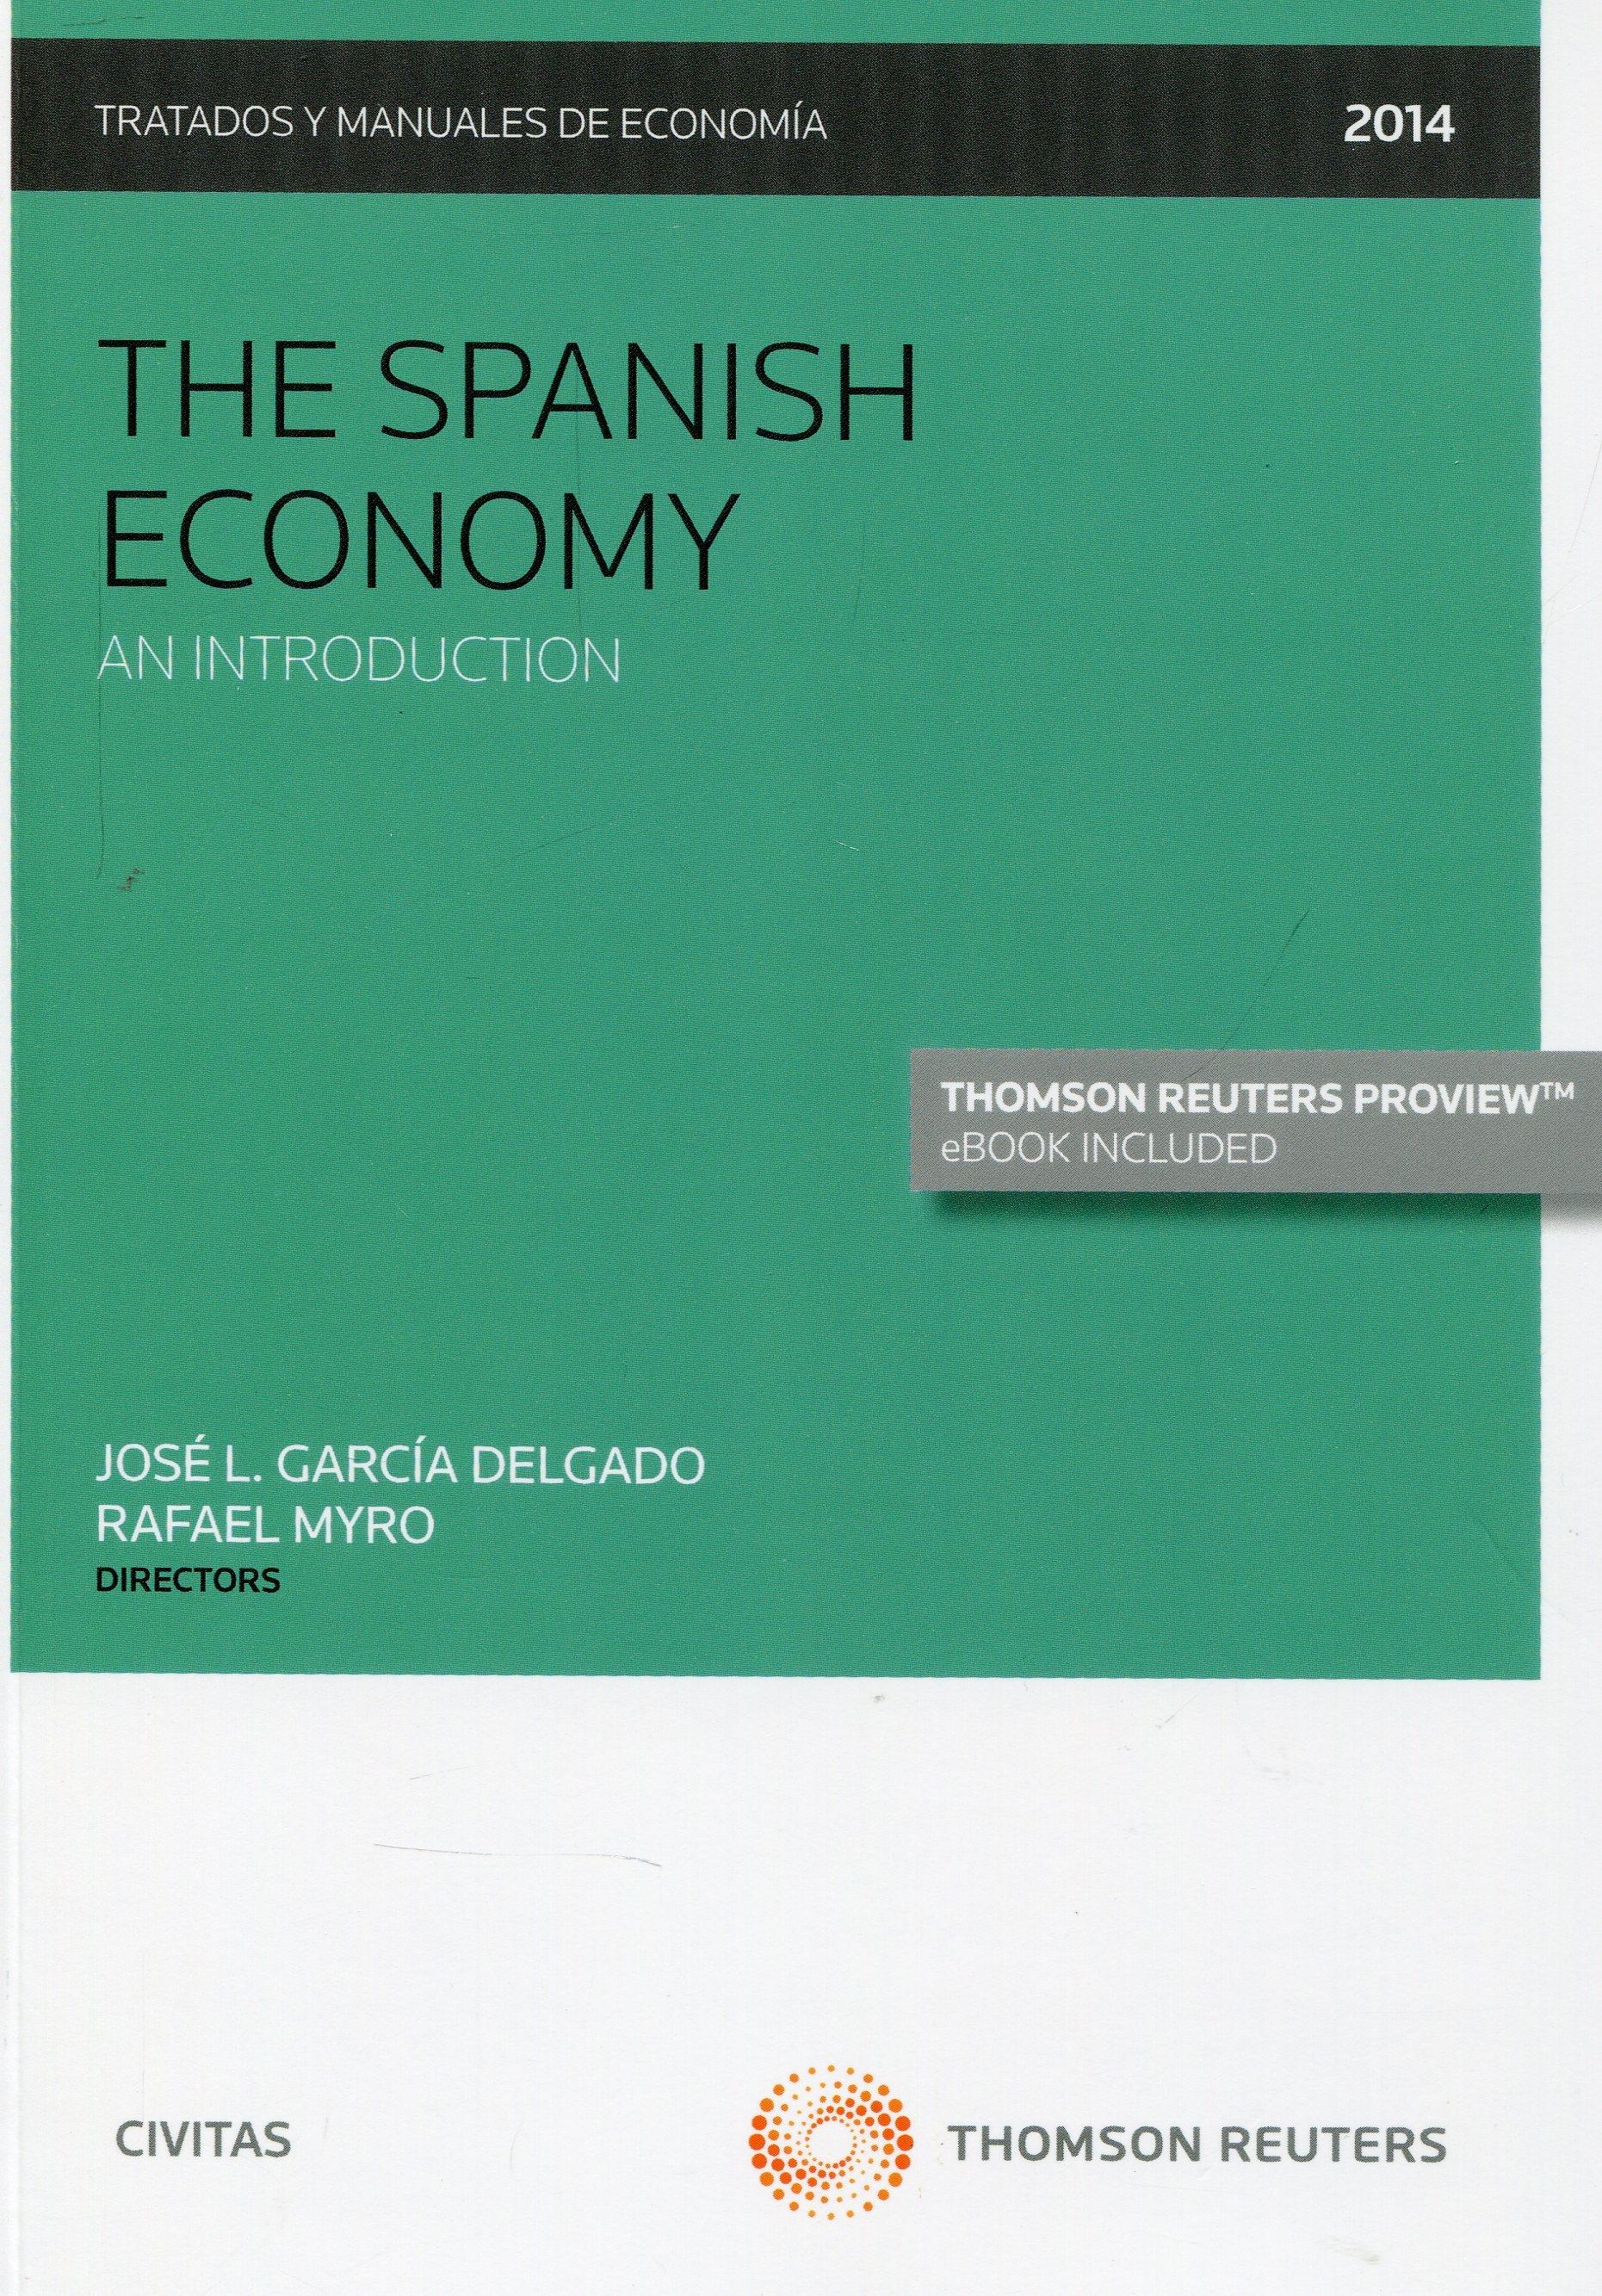 The Spanish Economy "An Introduction"